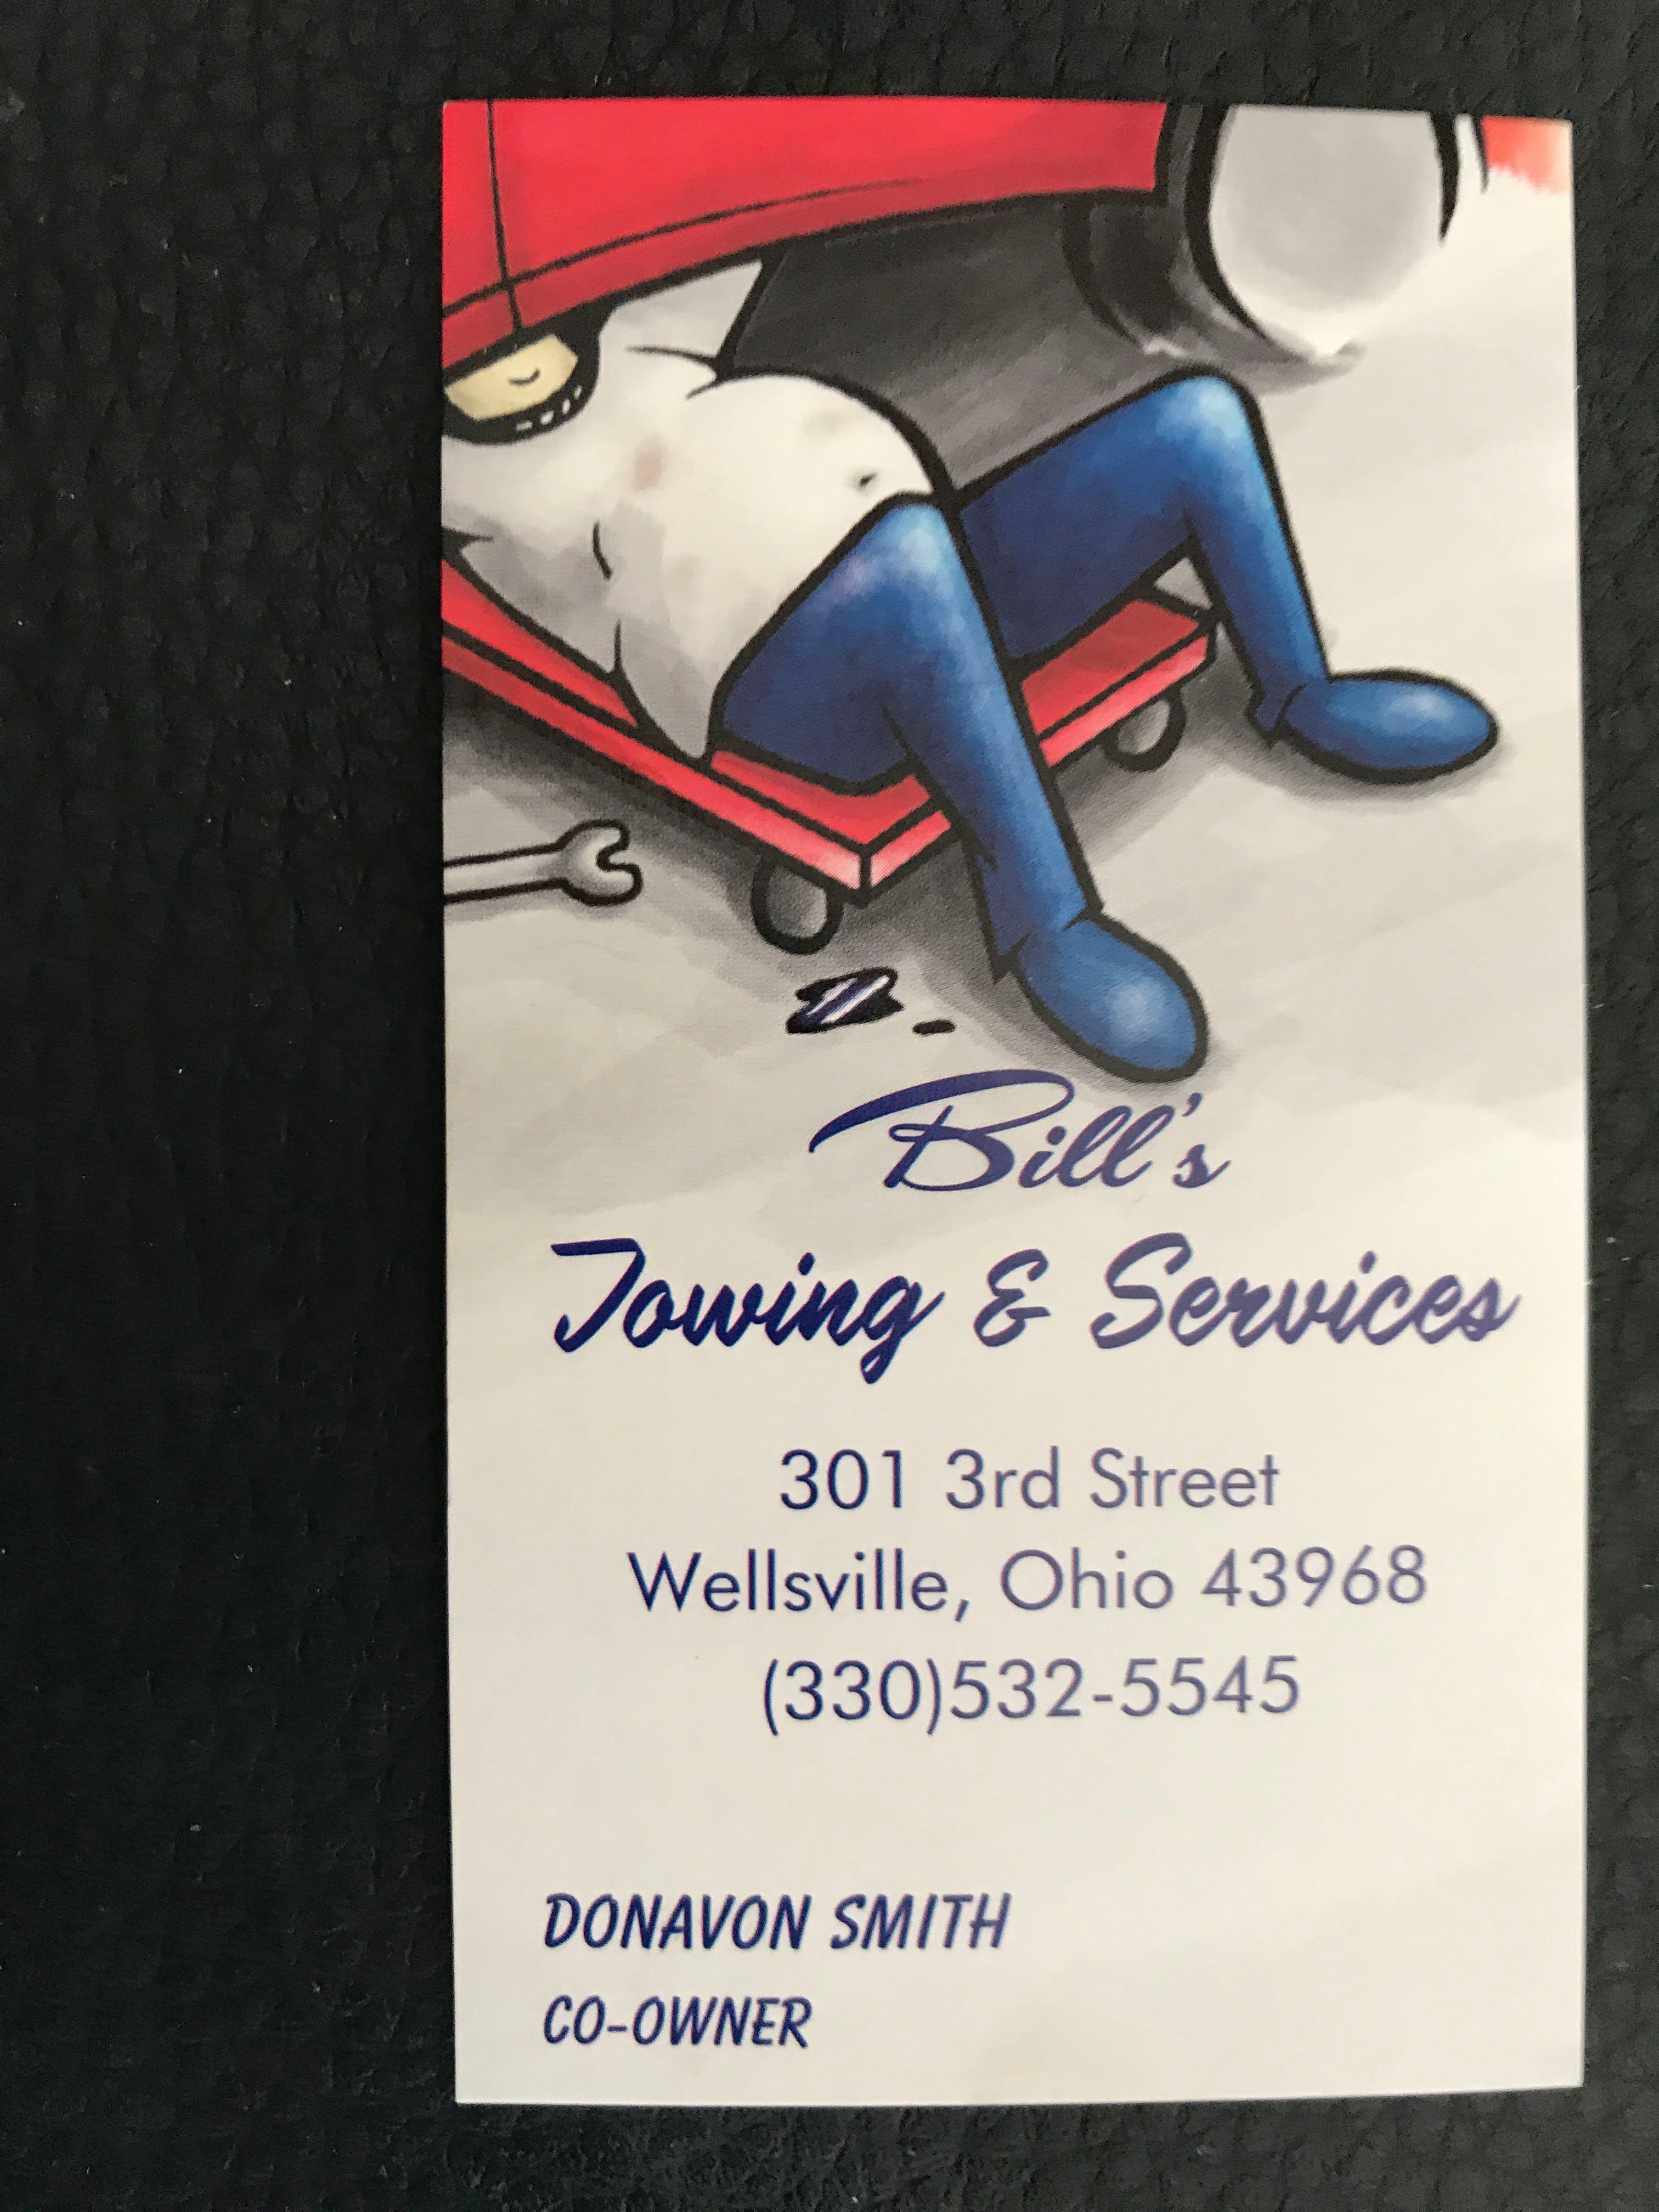 Bill's Towing & Services - Wellsville, OH 43968 - (330)532-5545 | ShowMeLocal.com